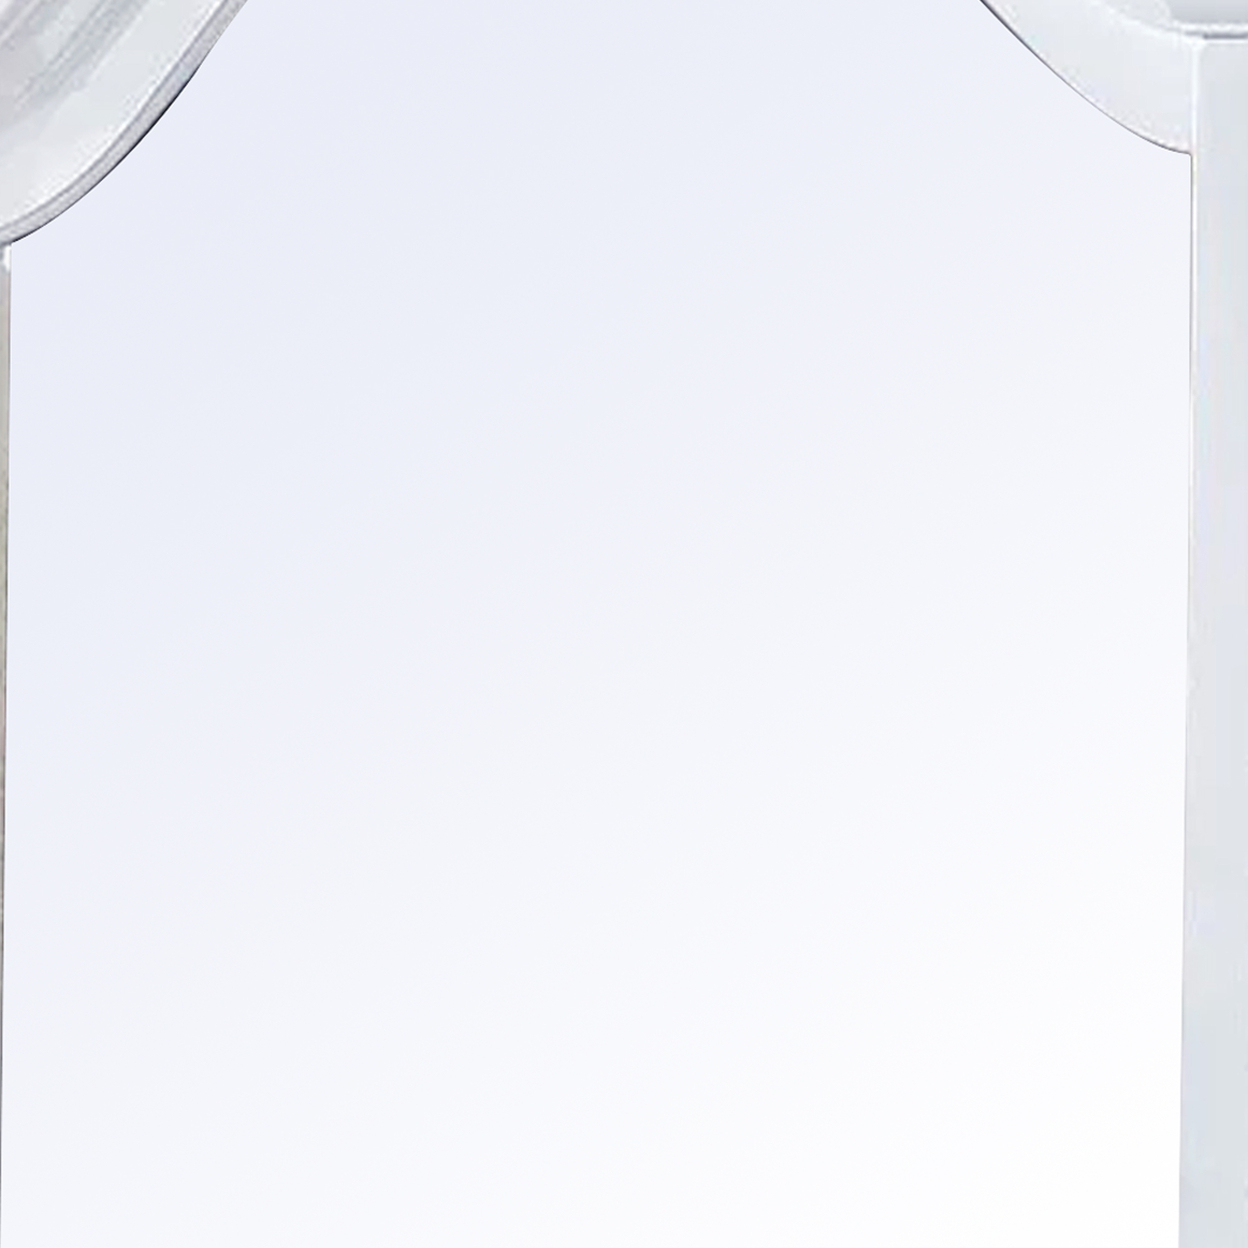 Transitional Style Wooden Wall Mirror With Crown Top, White- Saltoro Sherpi